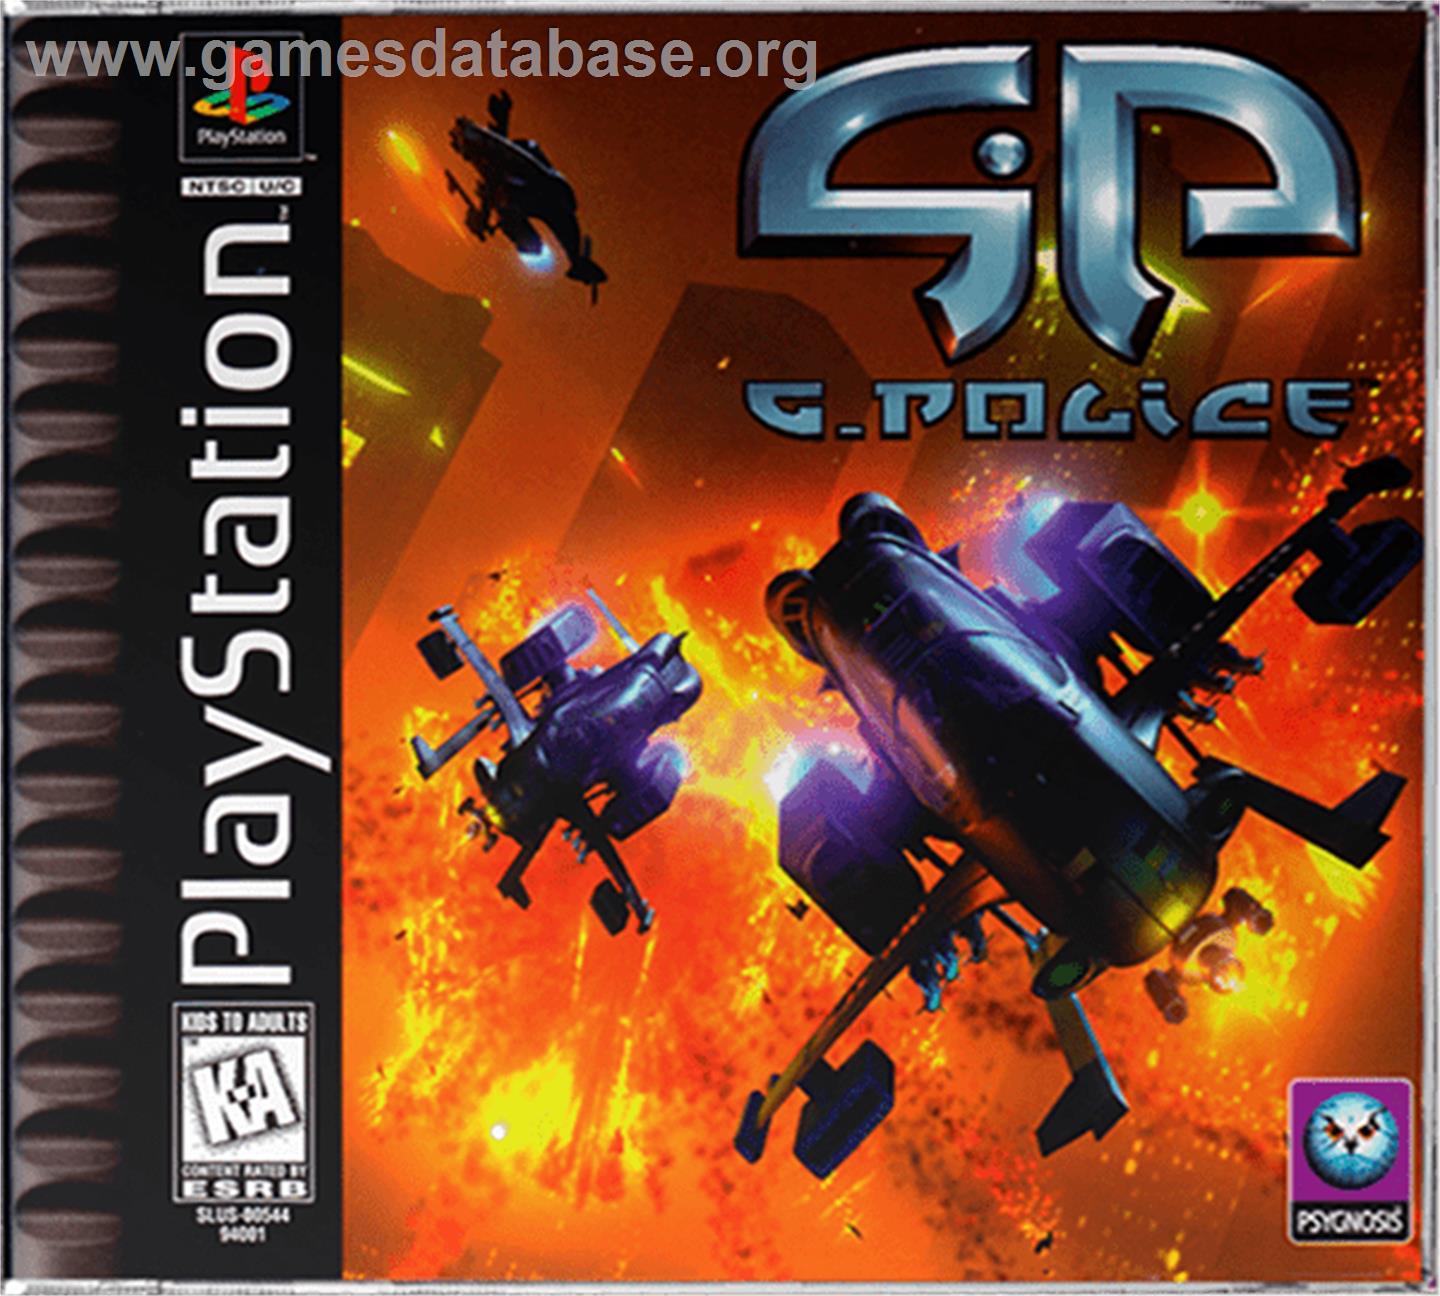 G-Police: Weapons of Justice - Sony Playstation - Artwork - Box